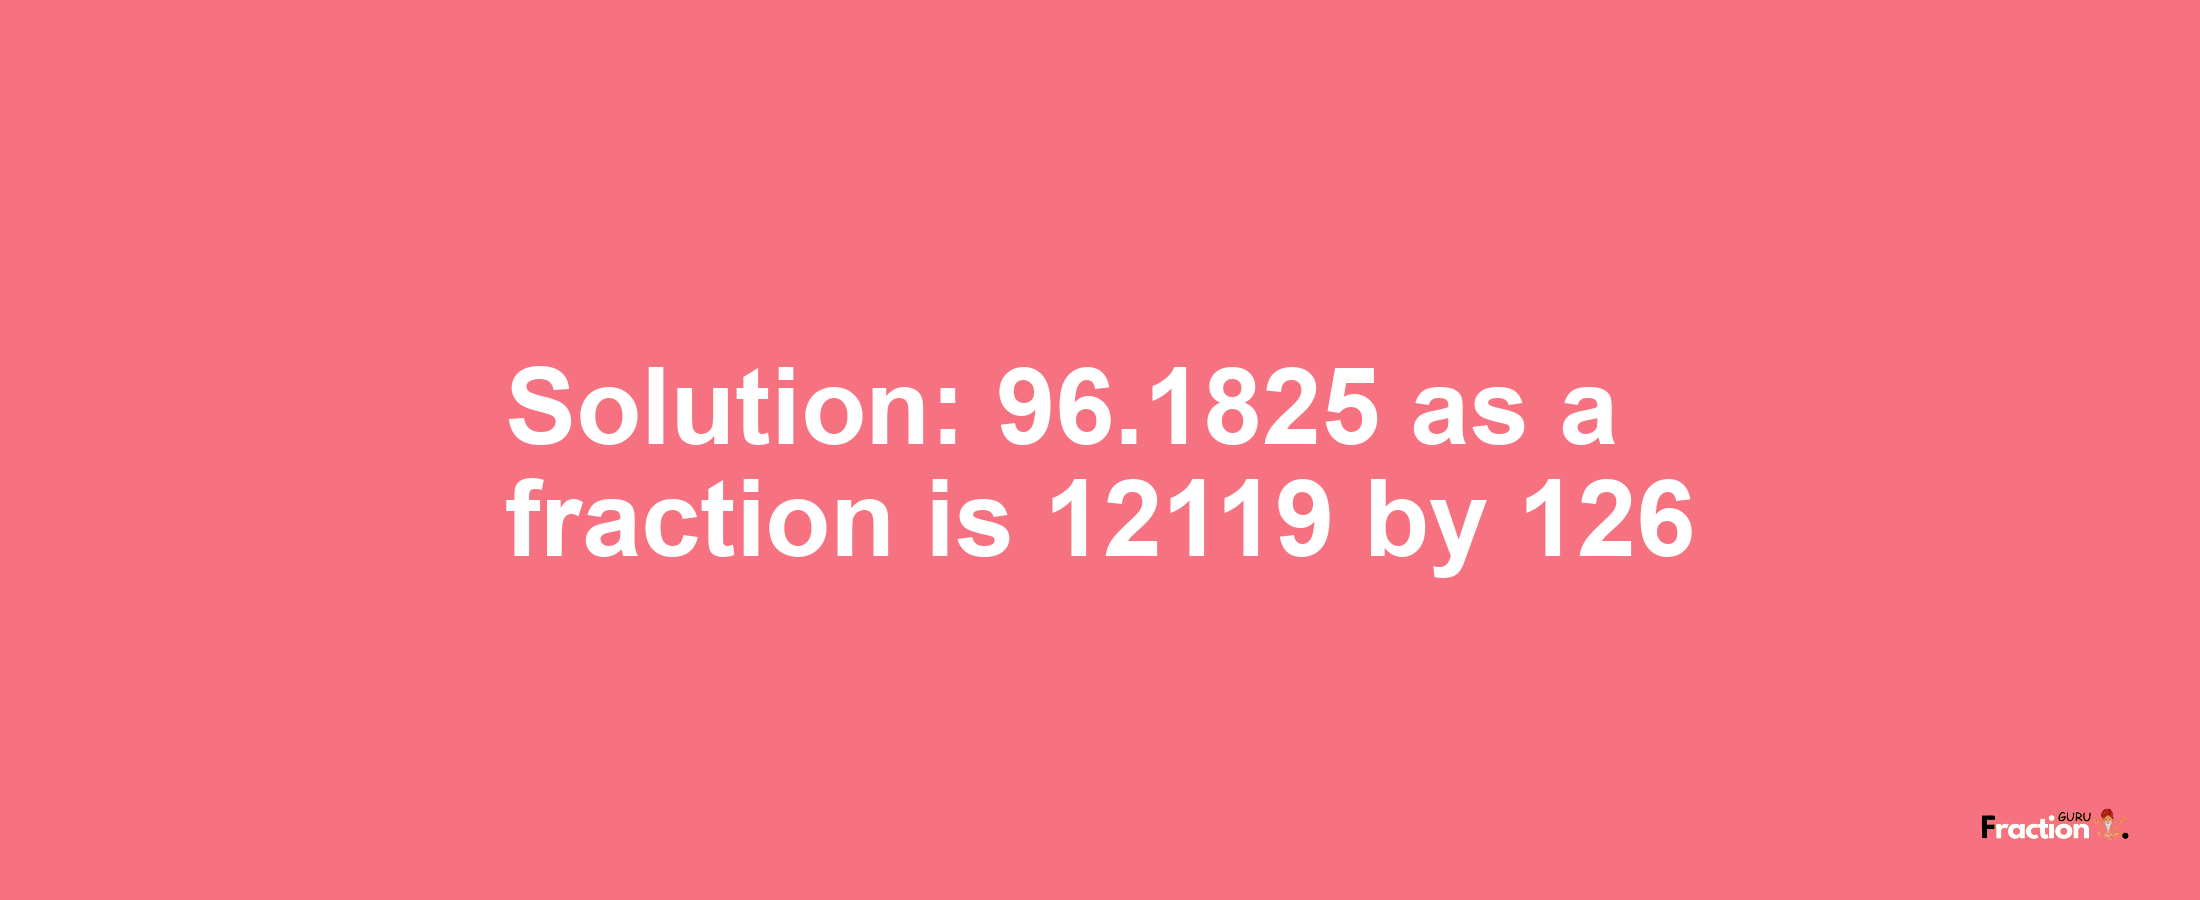 Solution:96.1825 as a fraction is 12119/126